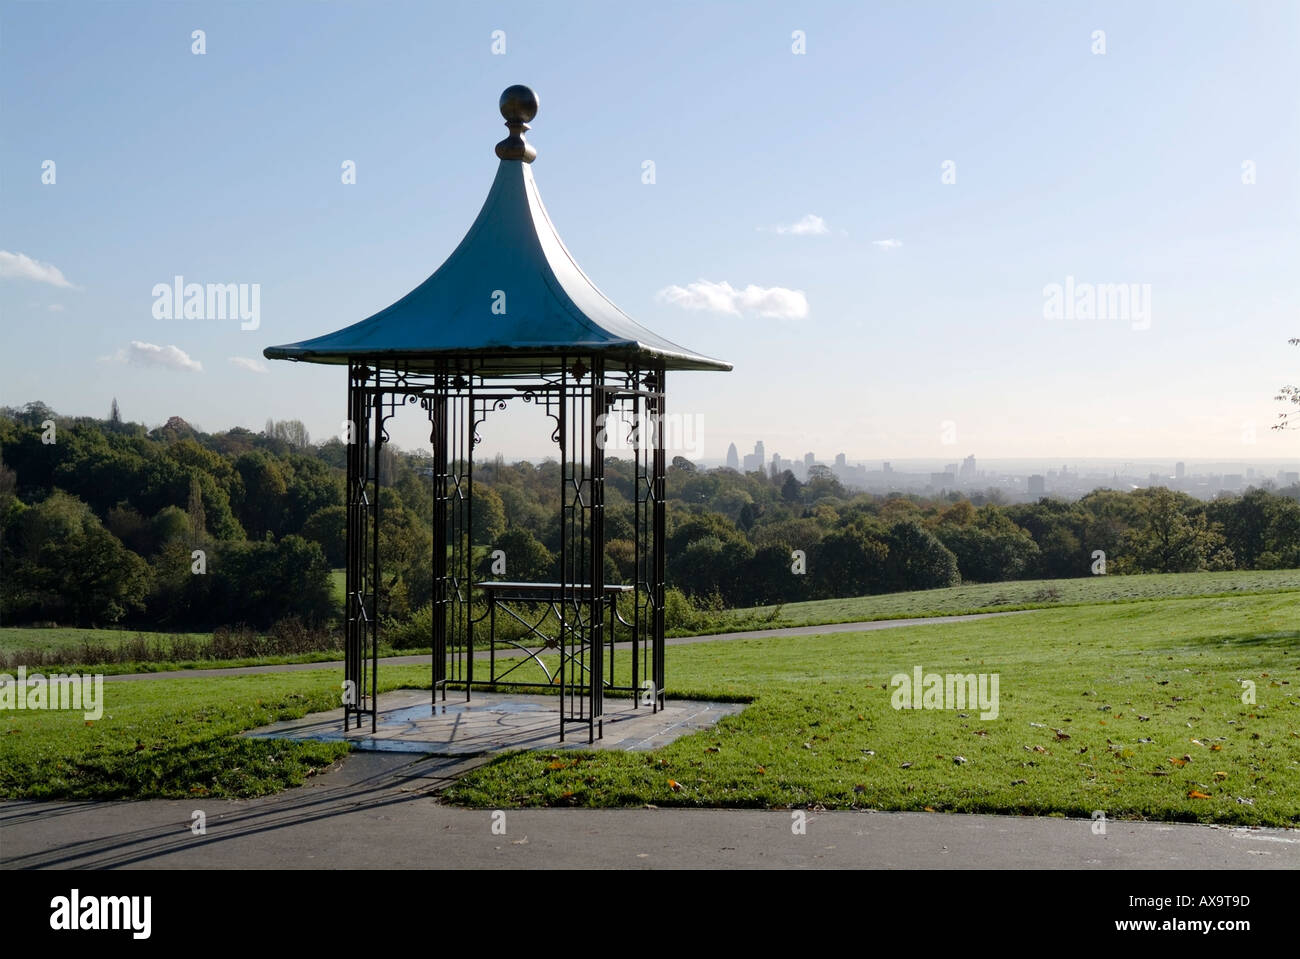 Viewing Pagoda on Hampstead Heath with a view of central London in the distance Stock Photo